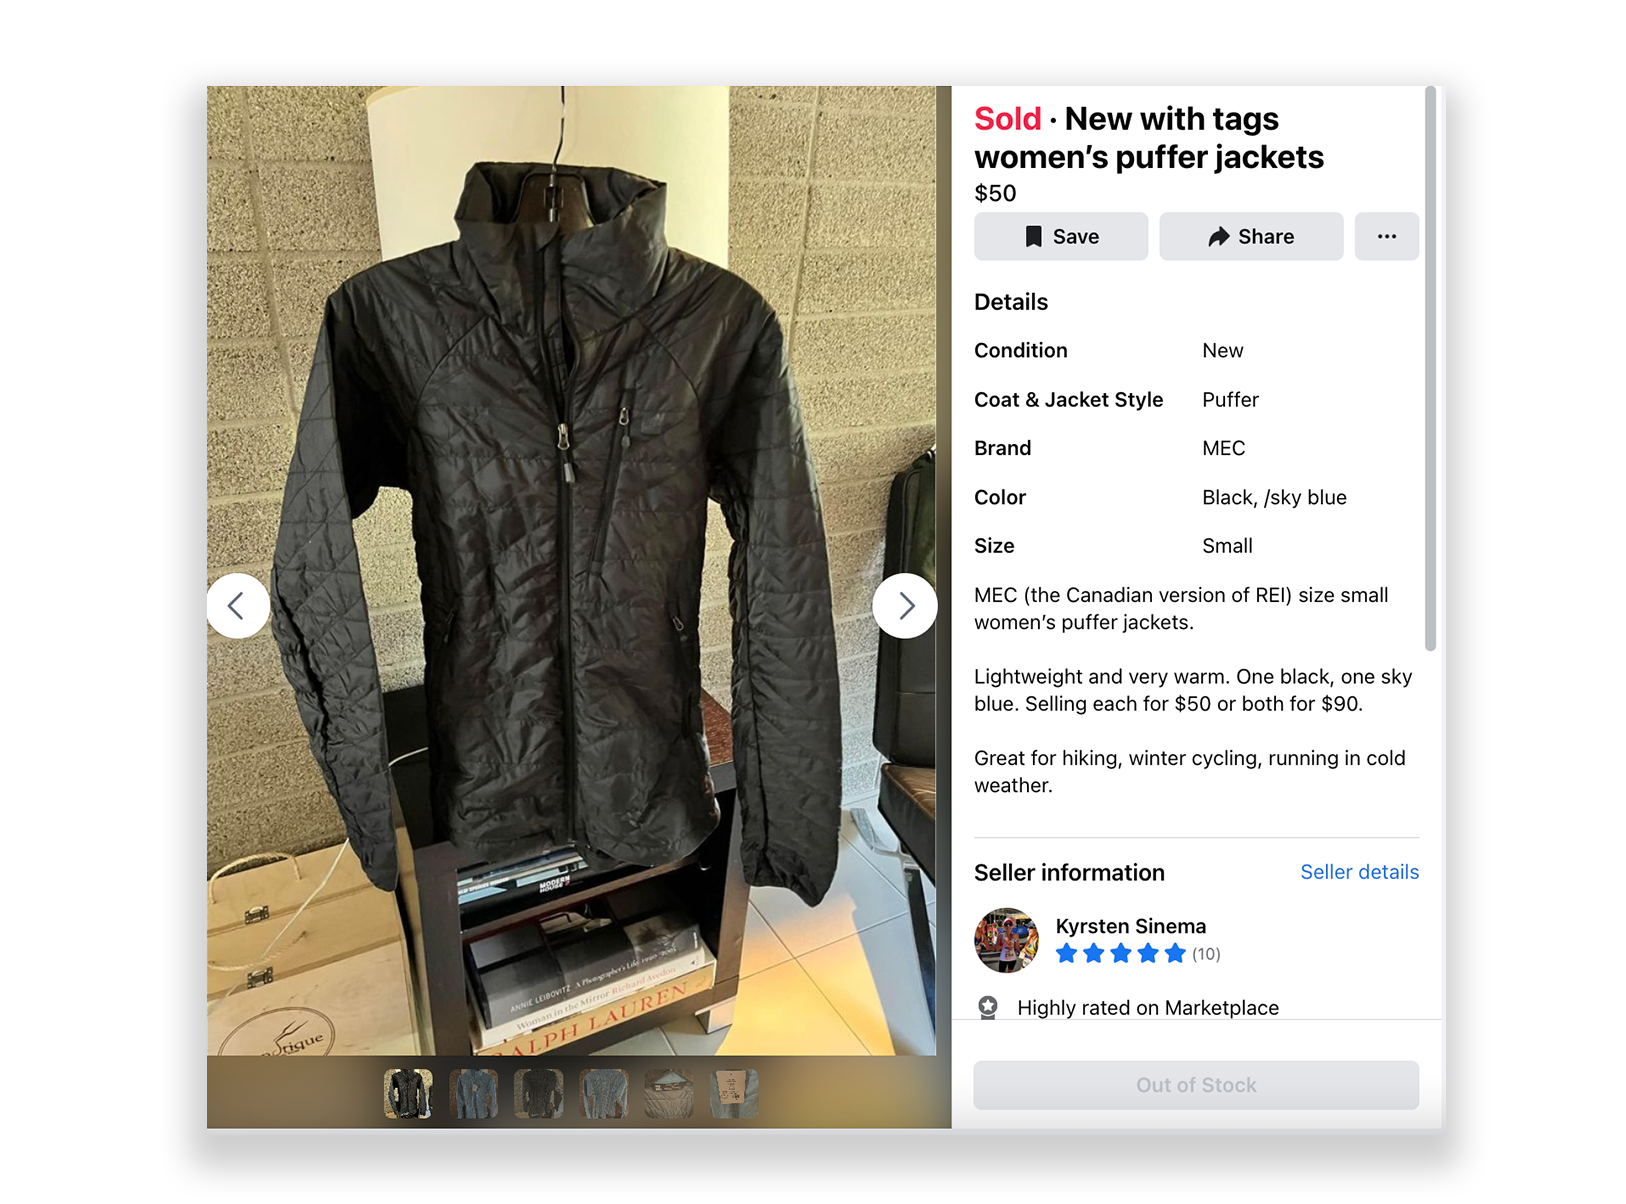 A photo of a puffer jacket, with a description and pricing details, in a Facebook Marketplace listing.